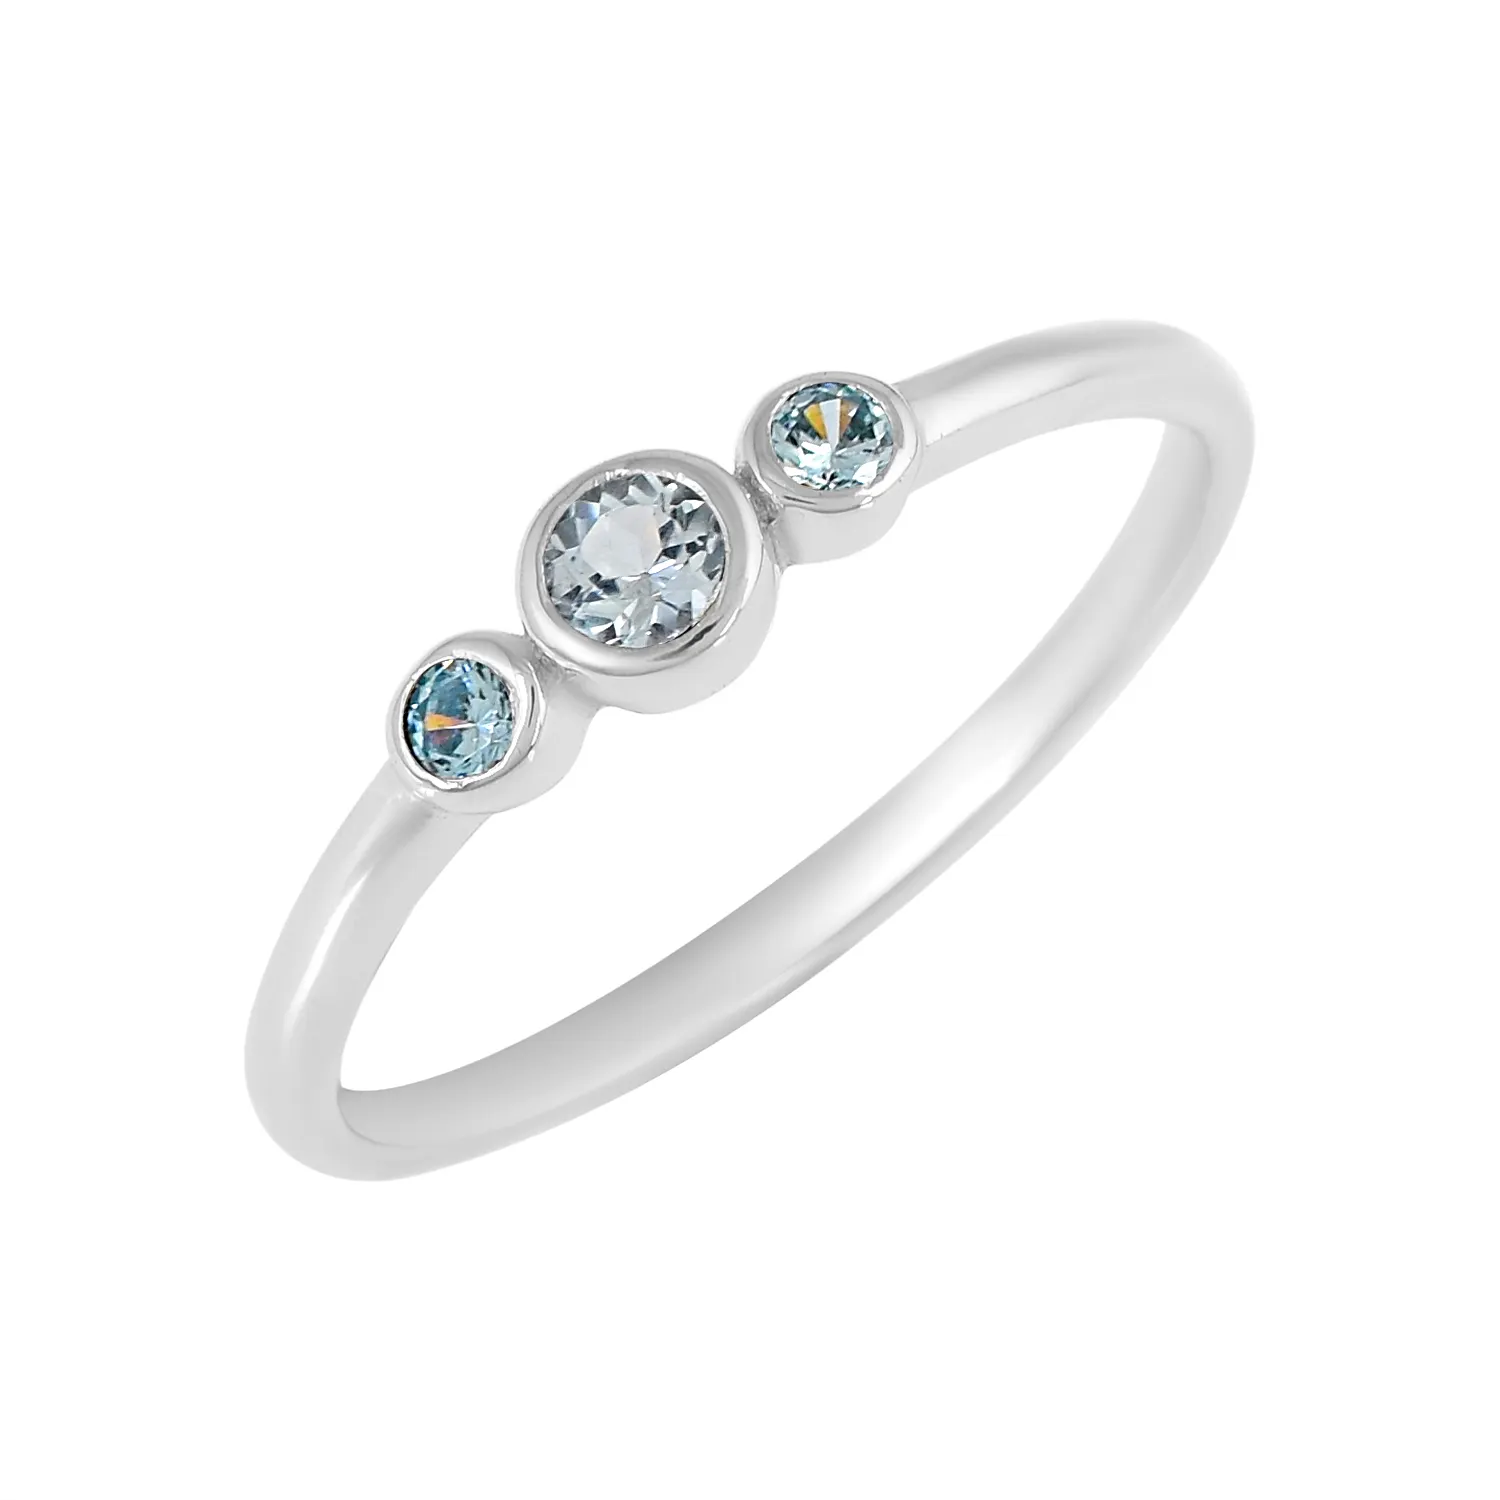 Wholesale Triple Stone Minimalist Ring 925 Sterling Silver Engagement Promise Band Natural Blue Topaz Gemstone Women's Jewelry